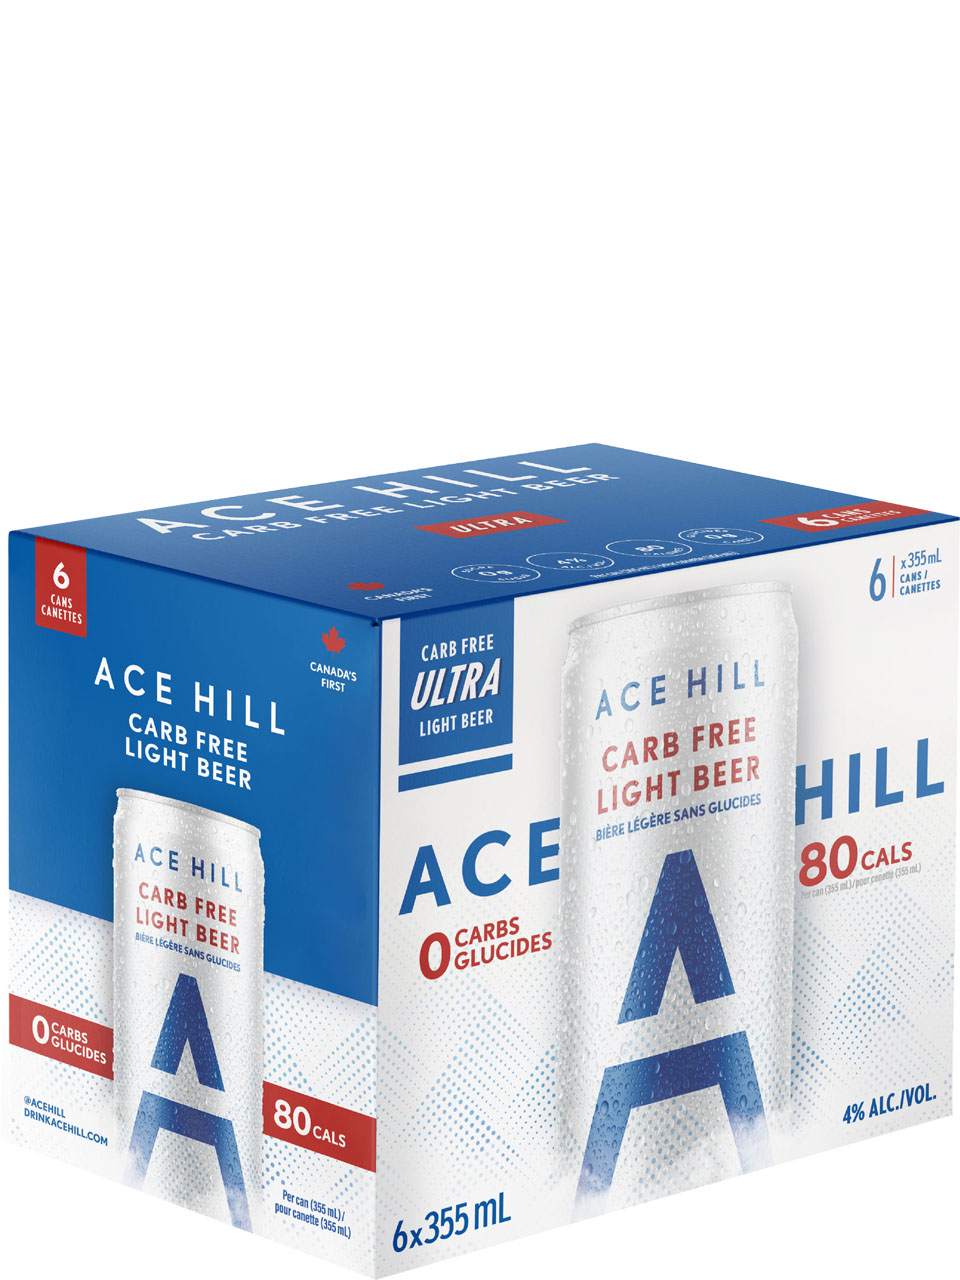 Ace Hill Carb Free Light Beer 6 Pack Cans